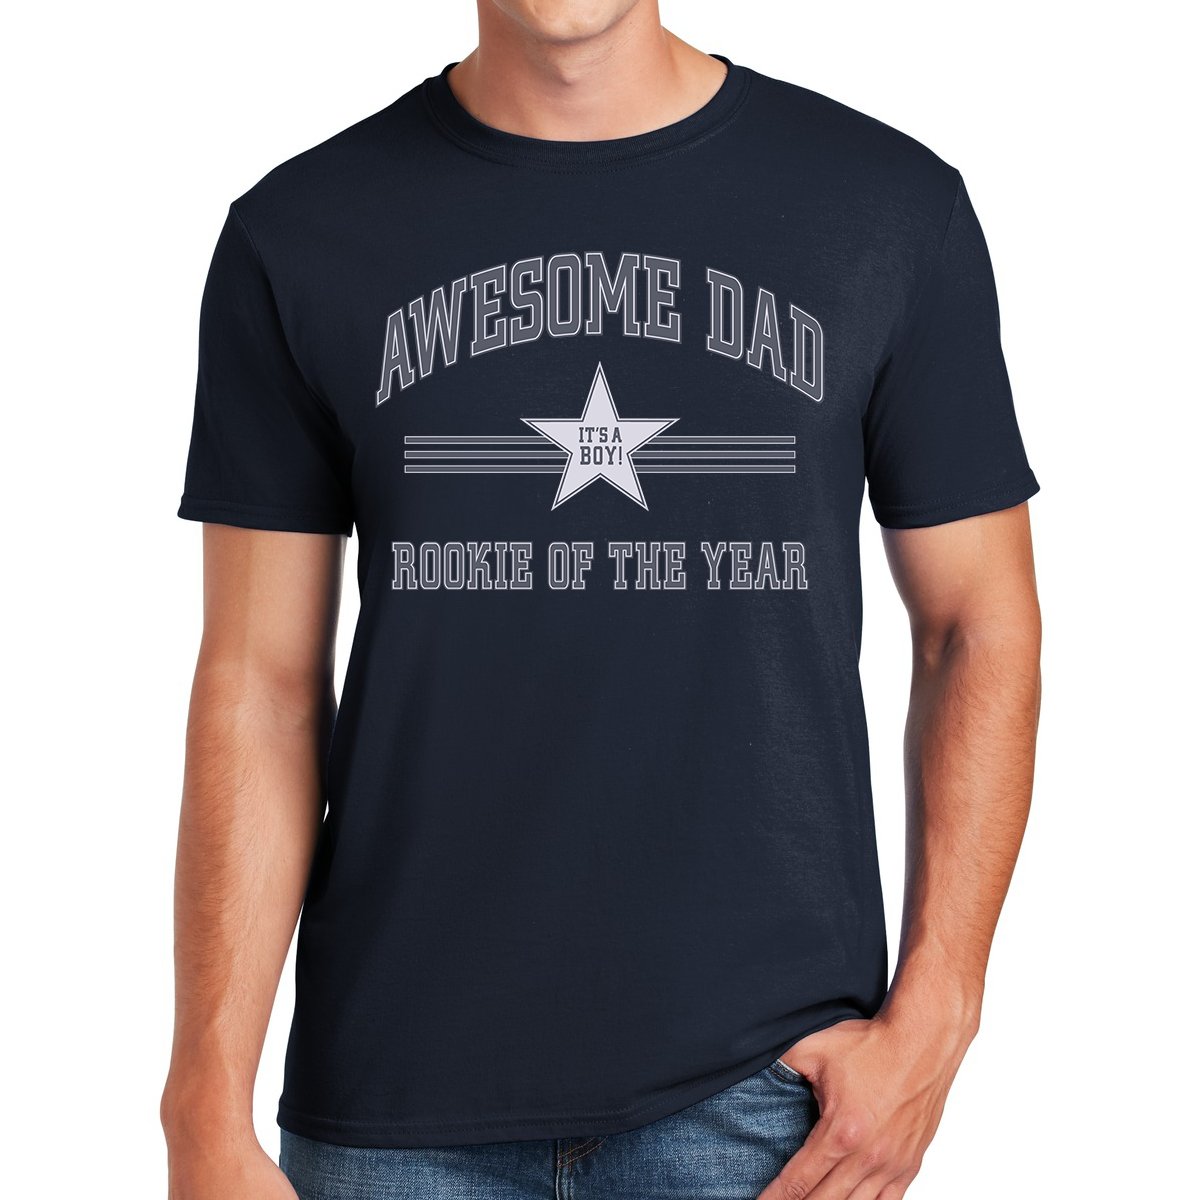 Awesome Dad Rookie Of The Year It's A Boy Welcoming Our Little MVP Gift For Dads T-shirt